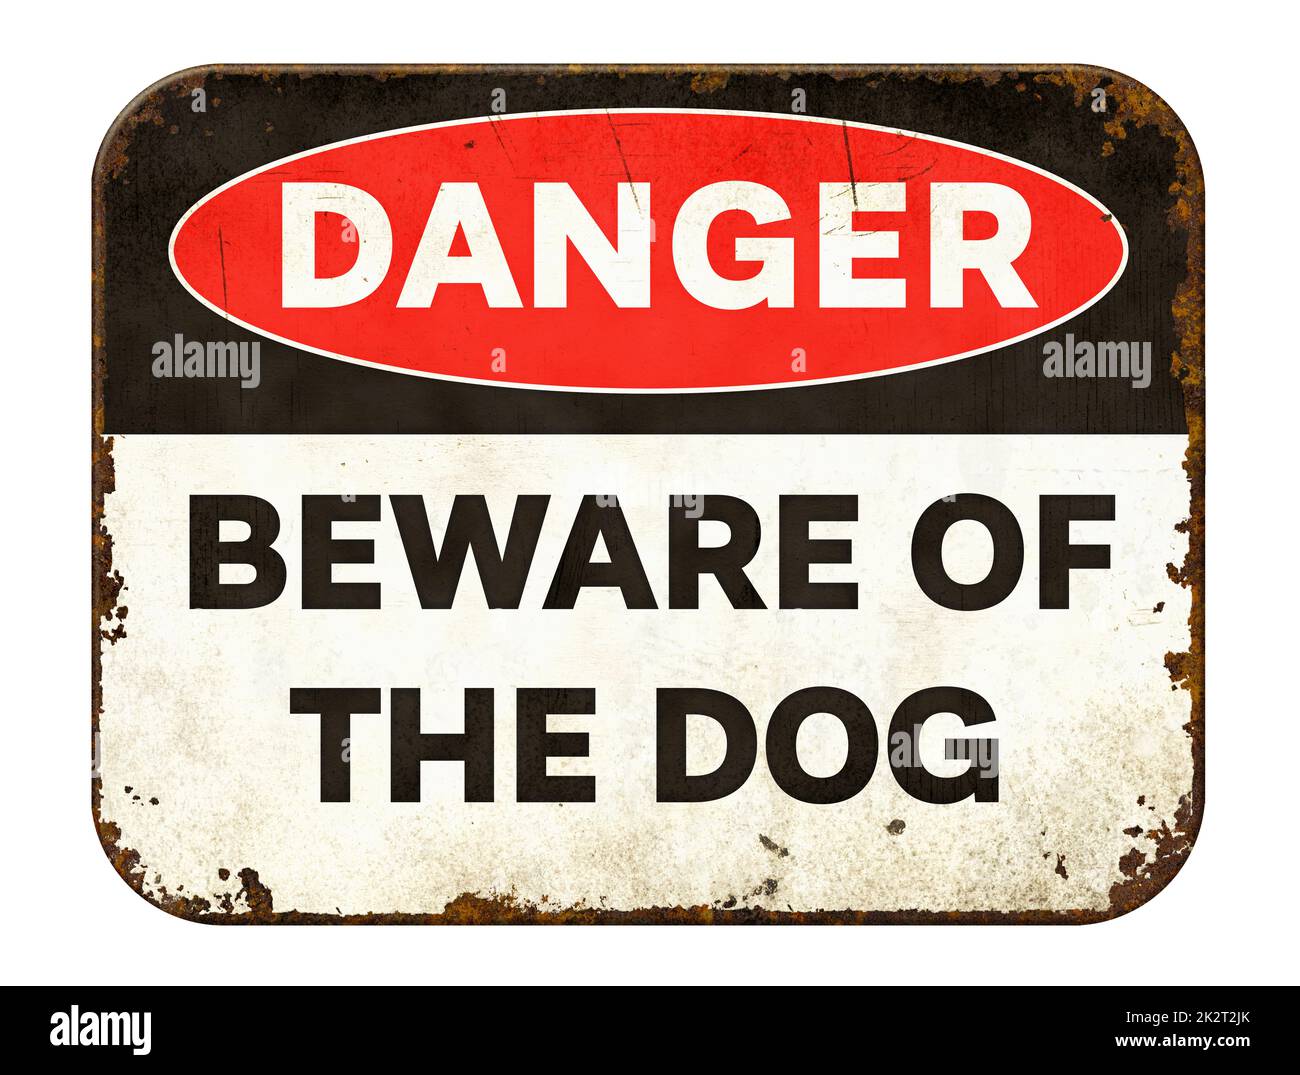 Vintage tin danger sign on a white background - Beware of the dog Stock Photo